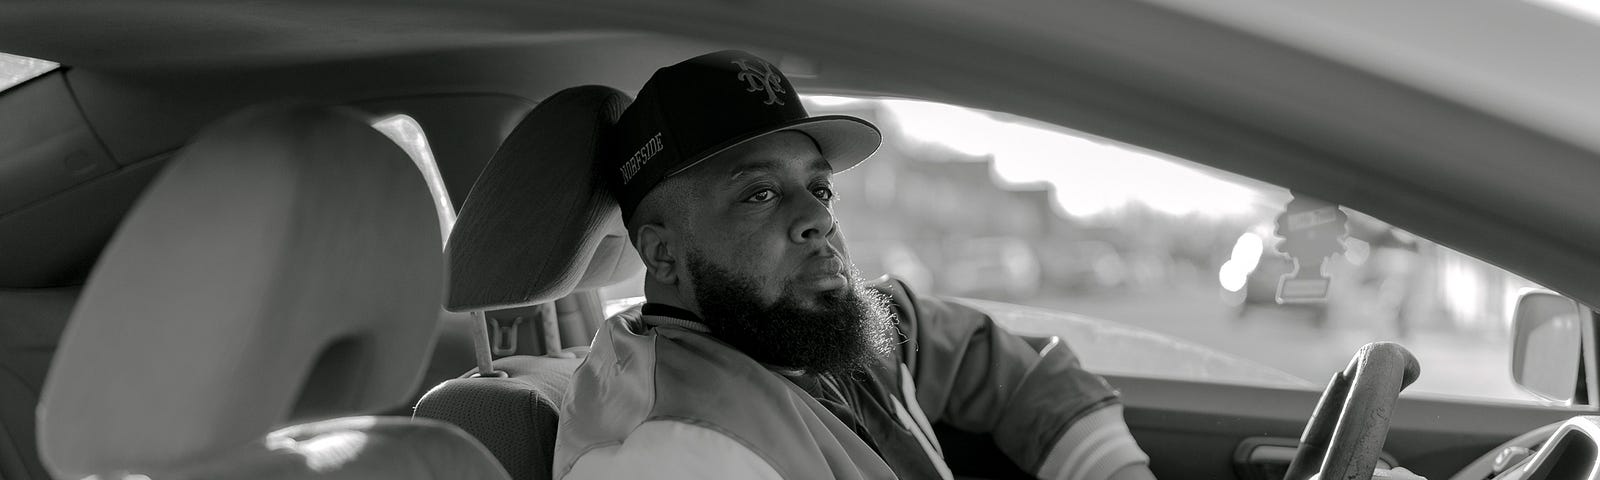 Anthony Herron Jr. in his car in St. Albans, Queens, New York on November 24, 2020.